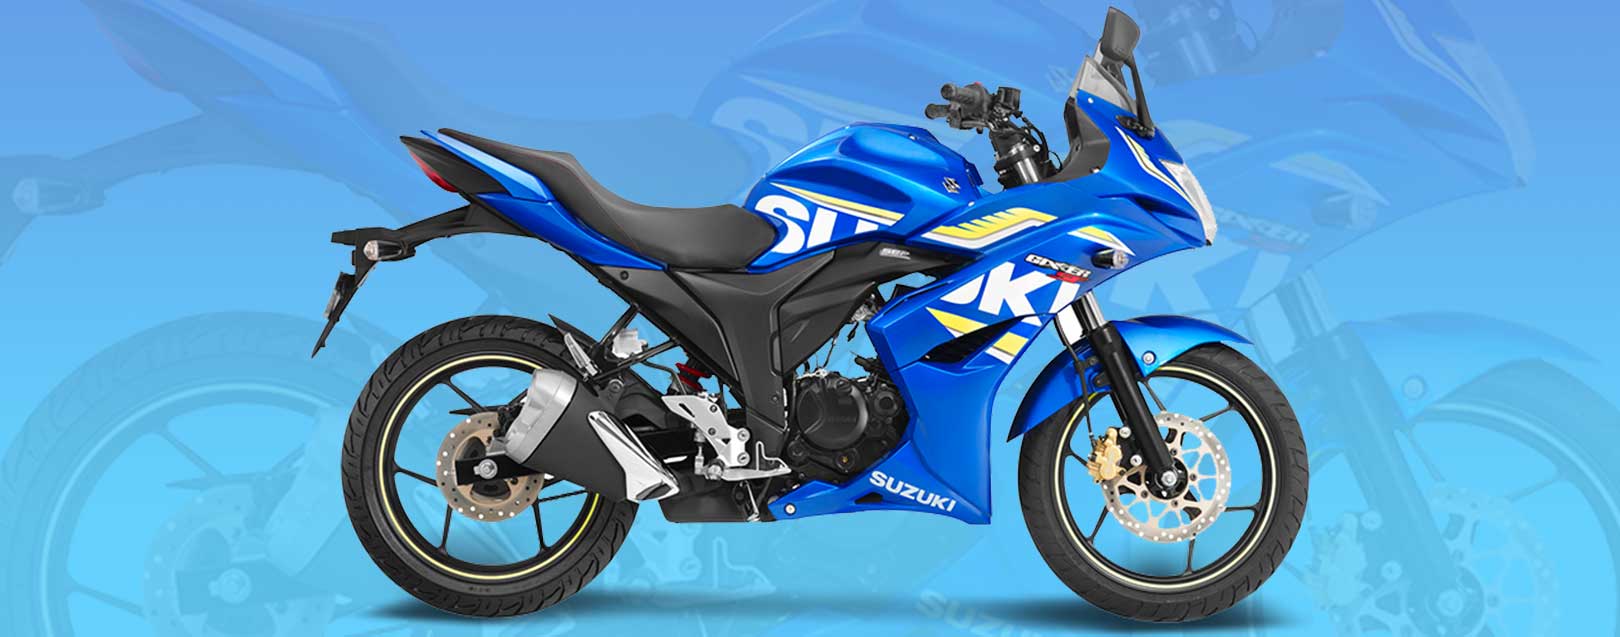 Suzuki to export made in India motorcycle model Gixxer to Japan